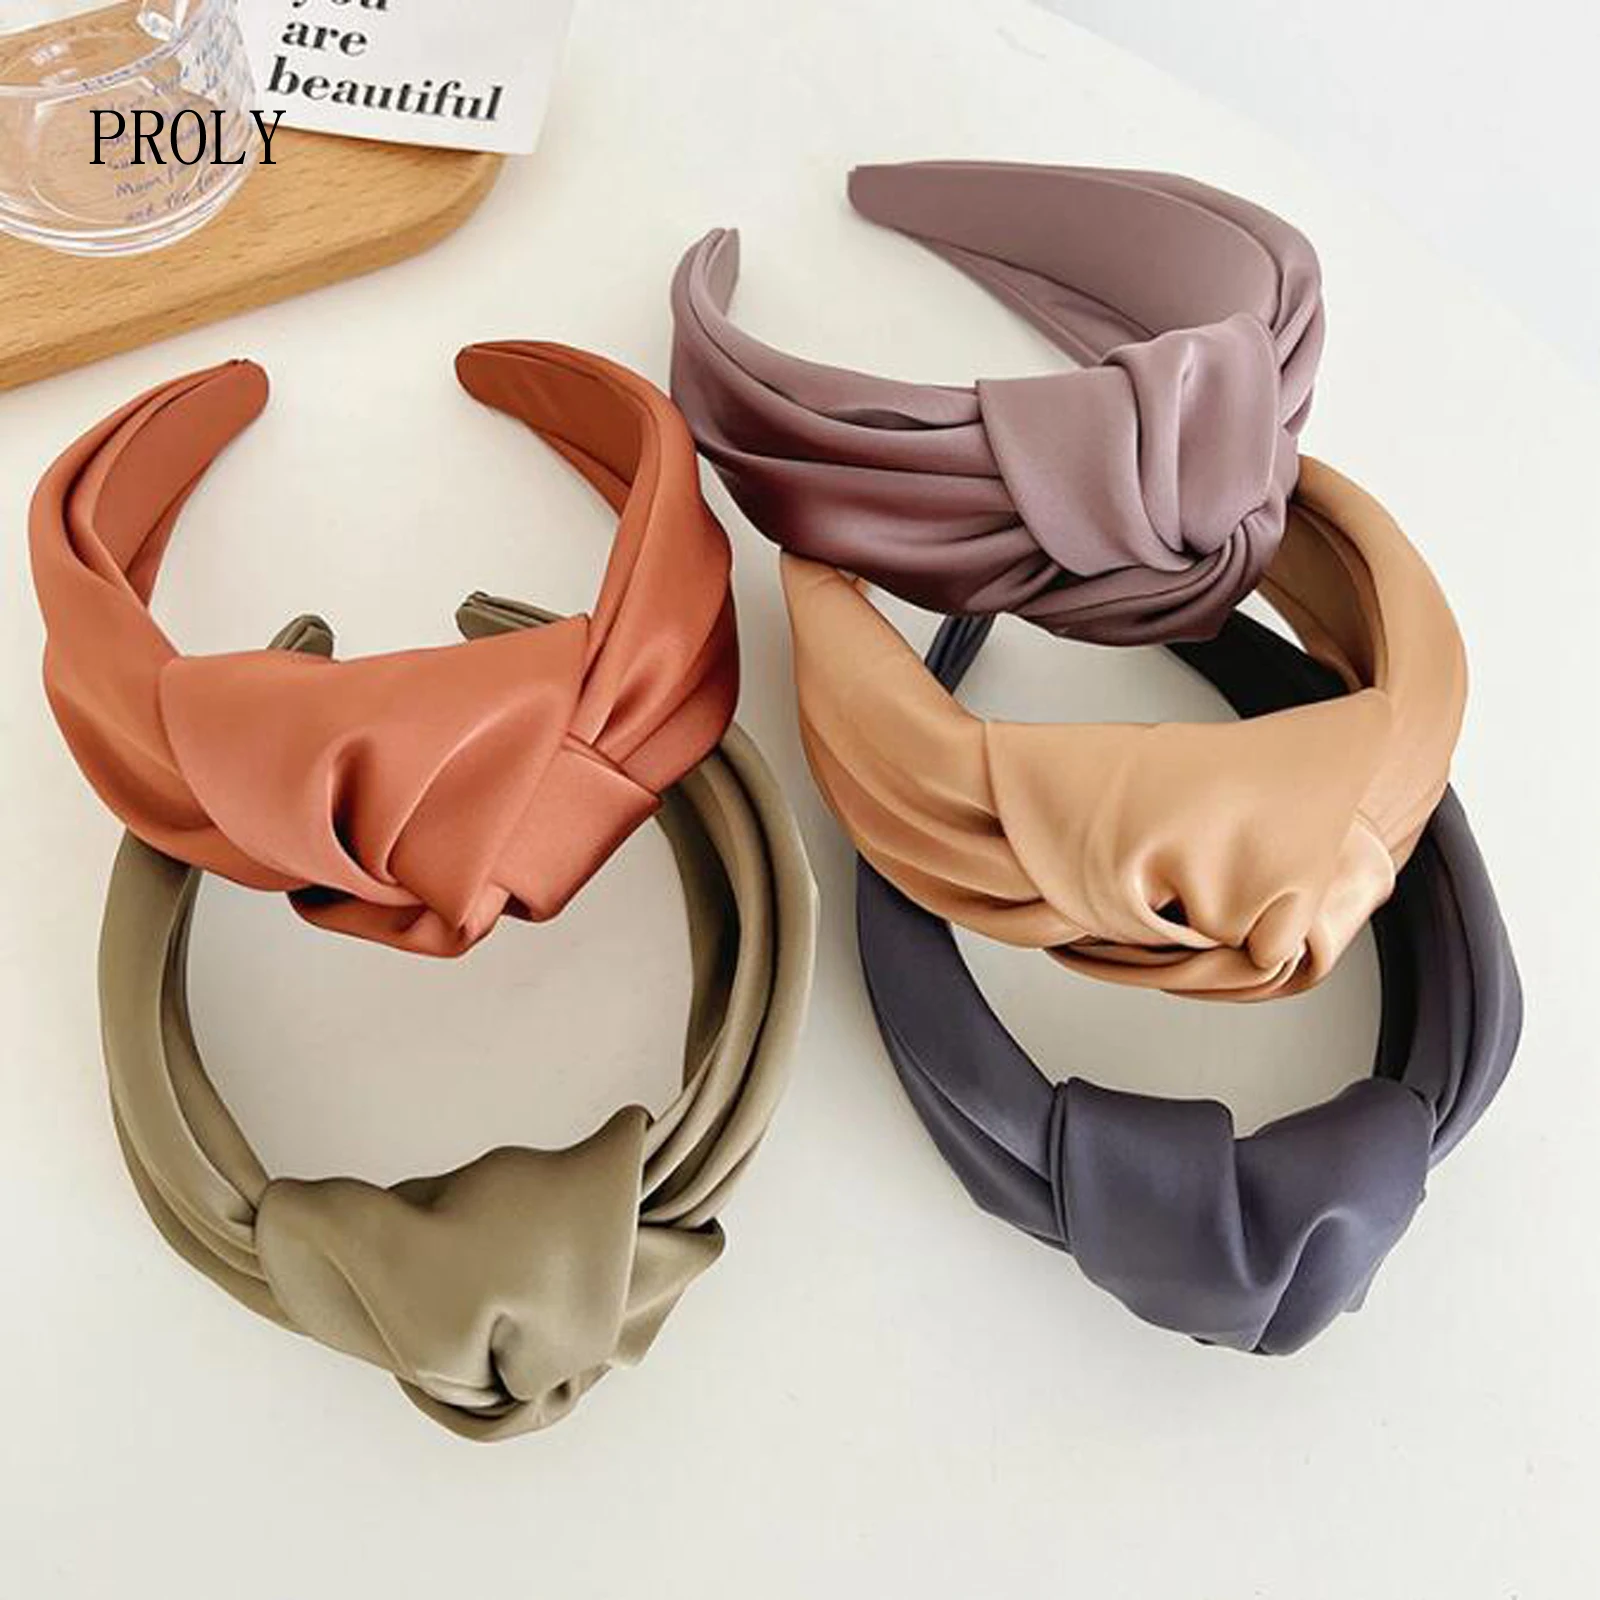 

PROLY New Fashion Women's Hair Accessories Solid Color Wide Side Hairband Center Knot Turban Adult Headband Wholesale